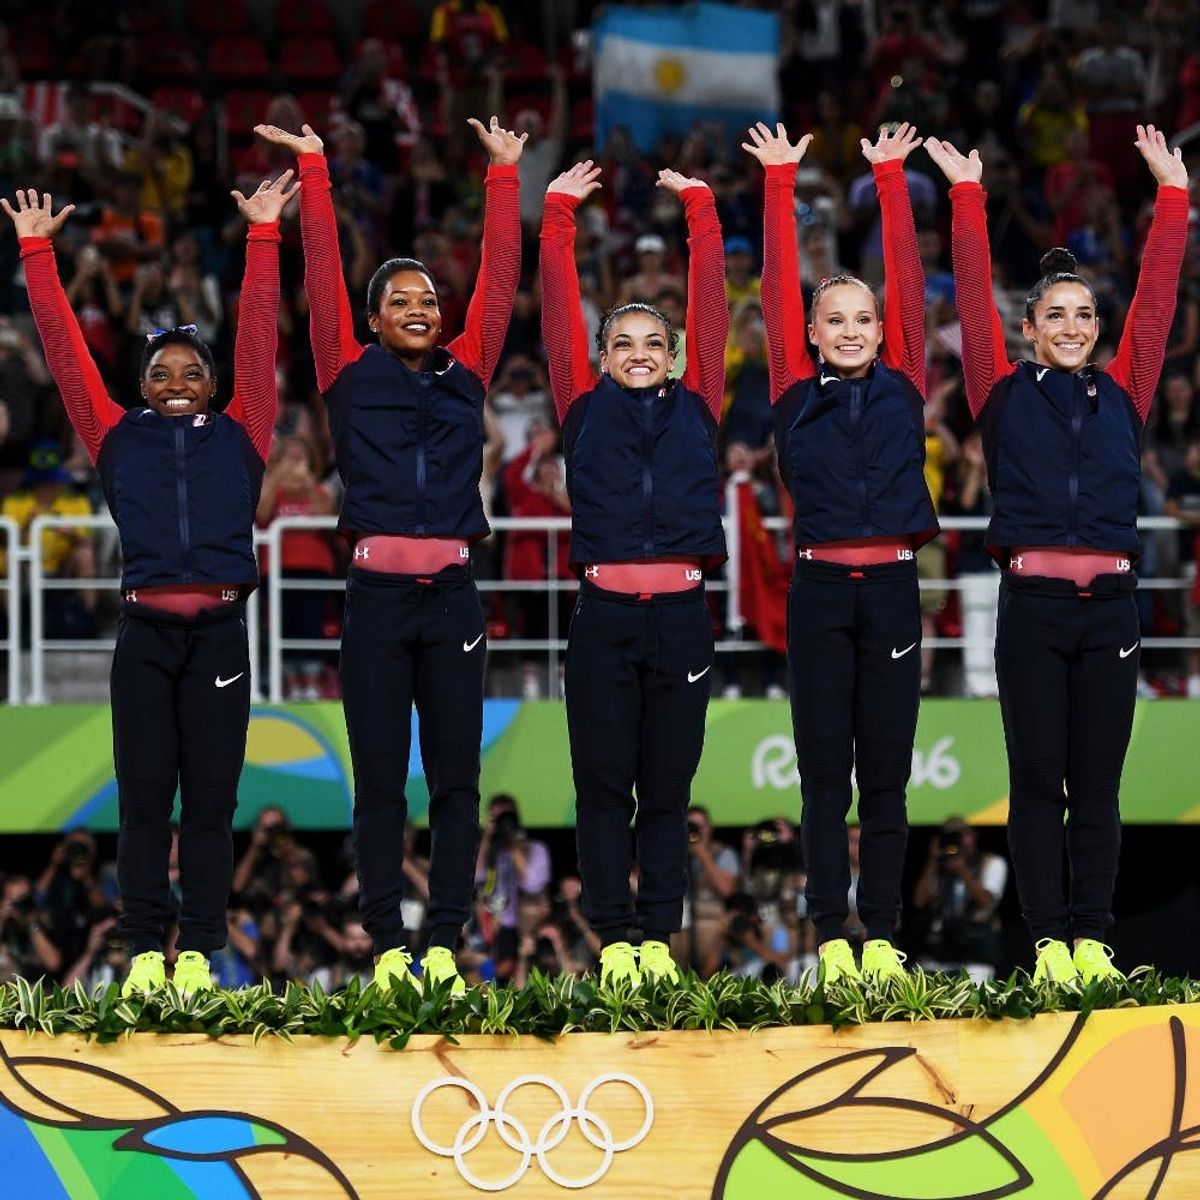 Here’s What the US Gymnastics Team Members Want to Do After Retirement